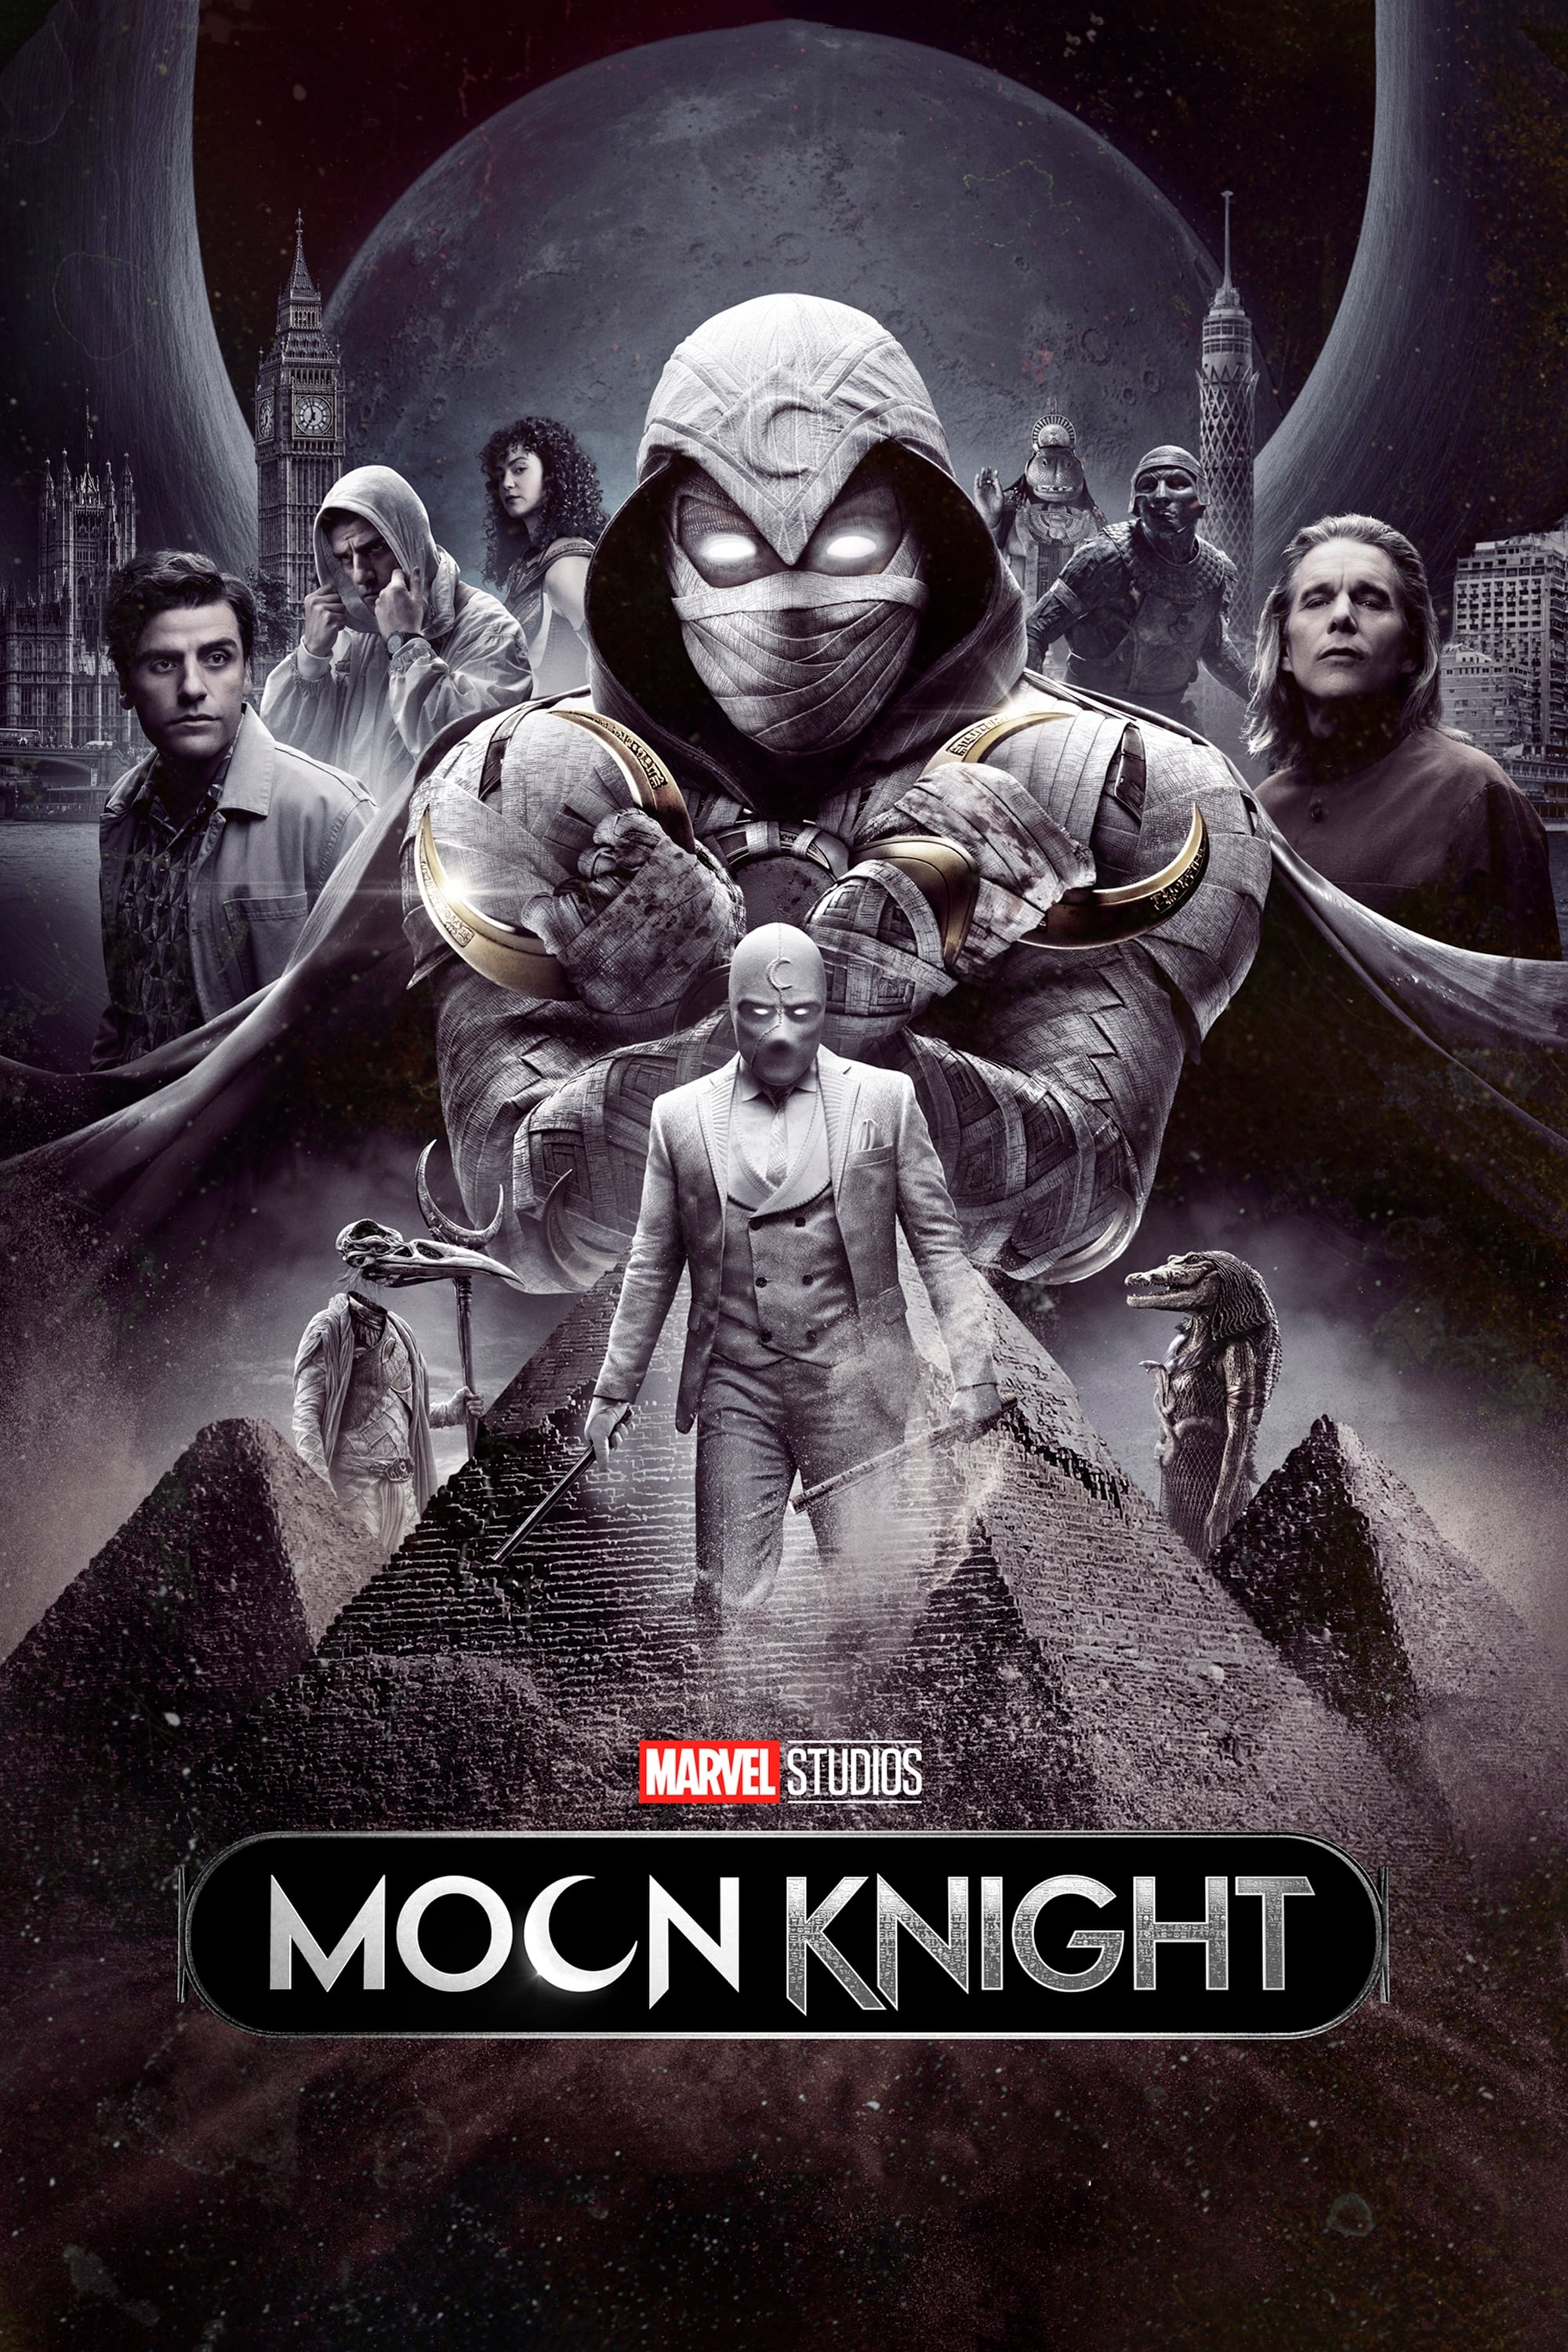 Moon Knight TV Shows About Based On Comic